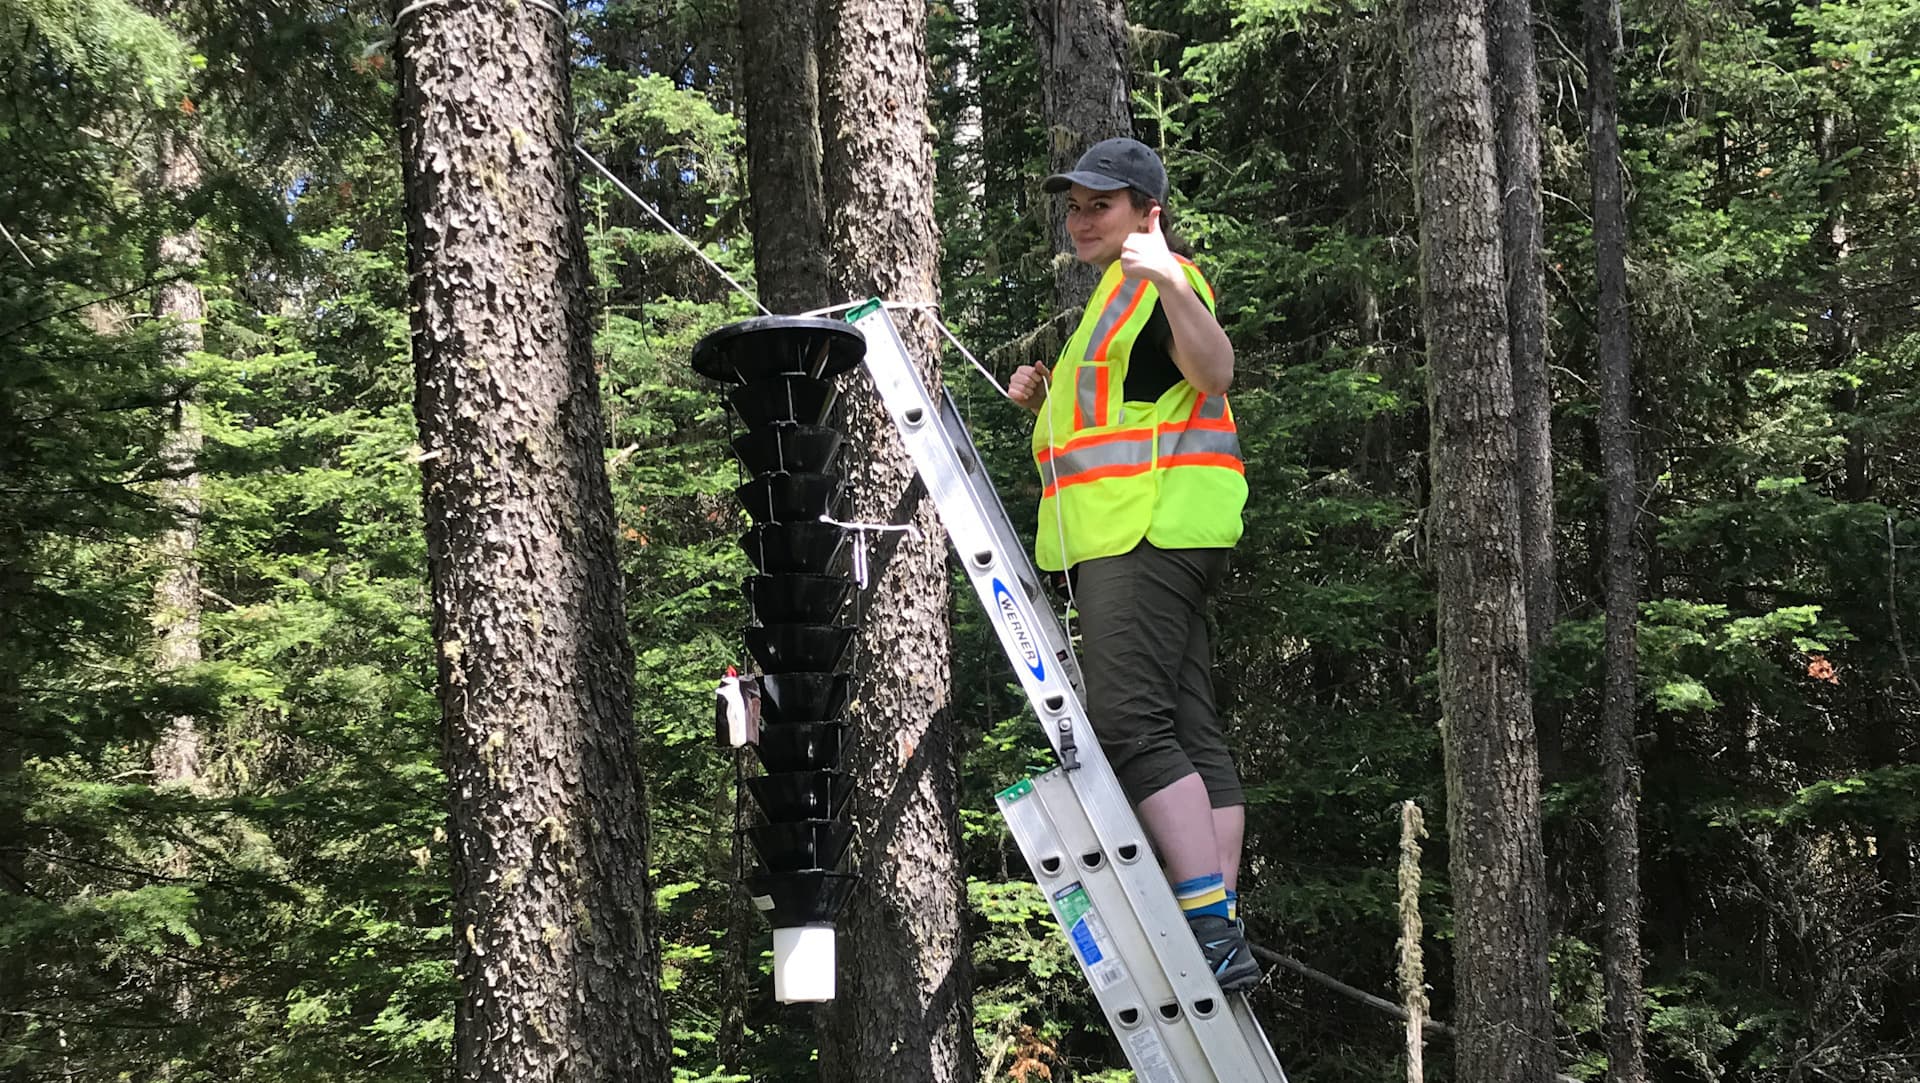 Research team member checking a Mountain Pine Beetle trap in the forest.